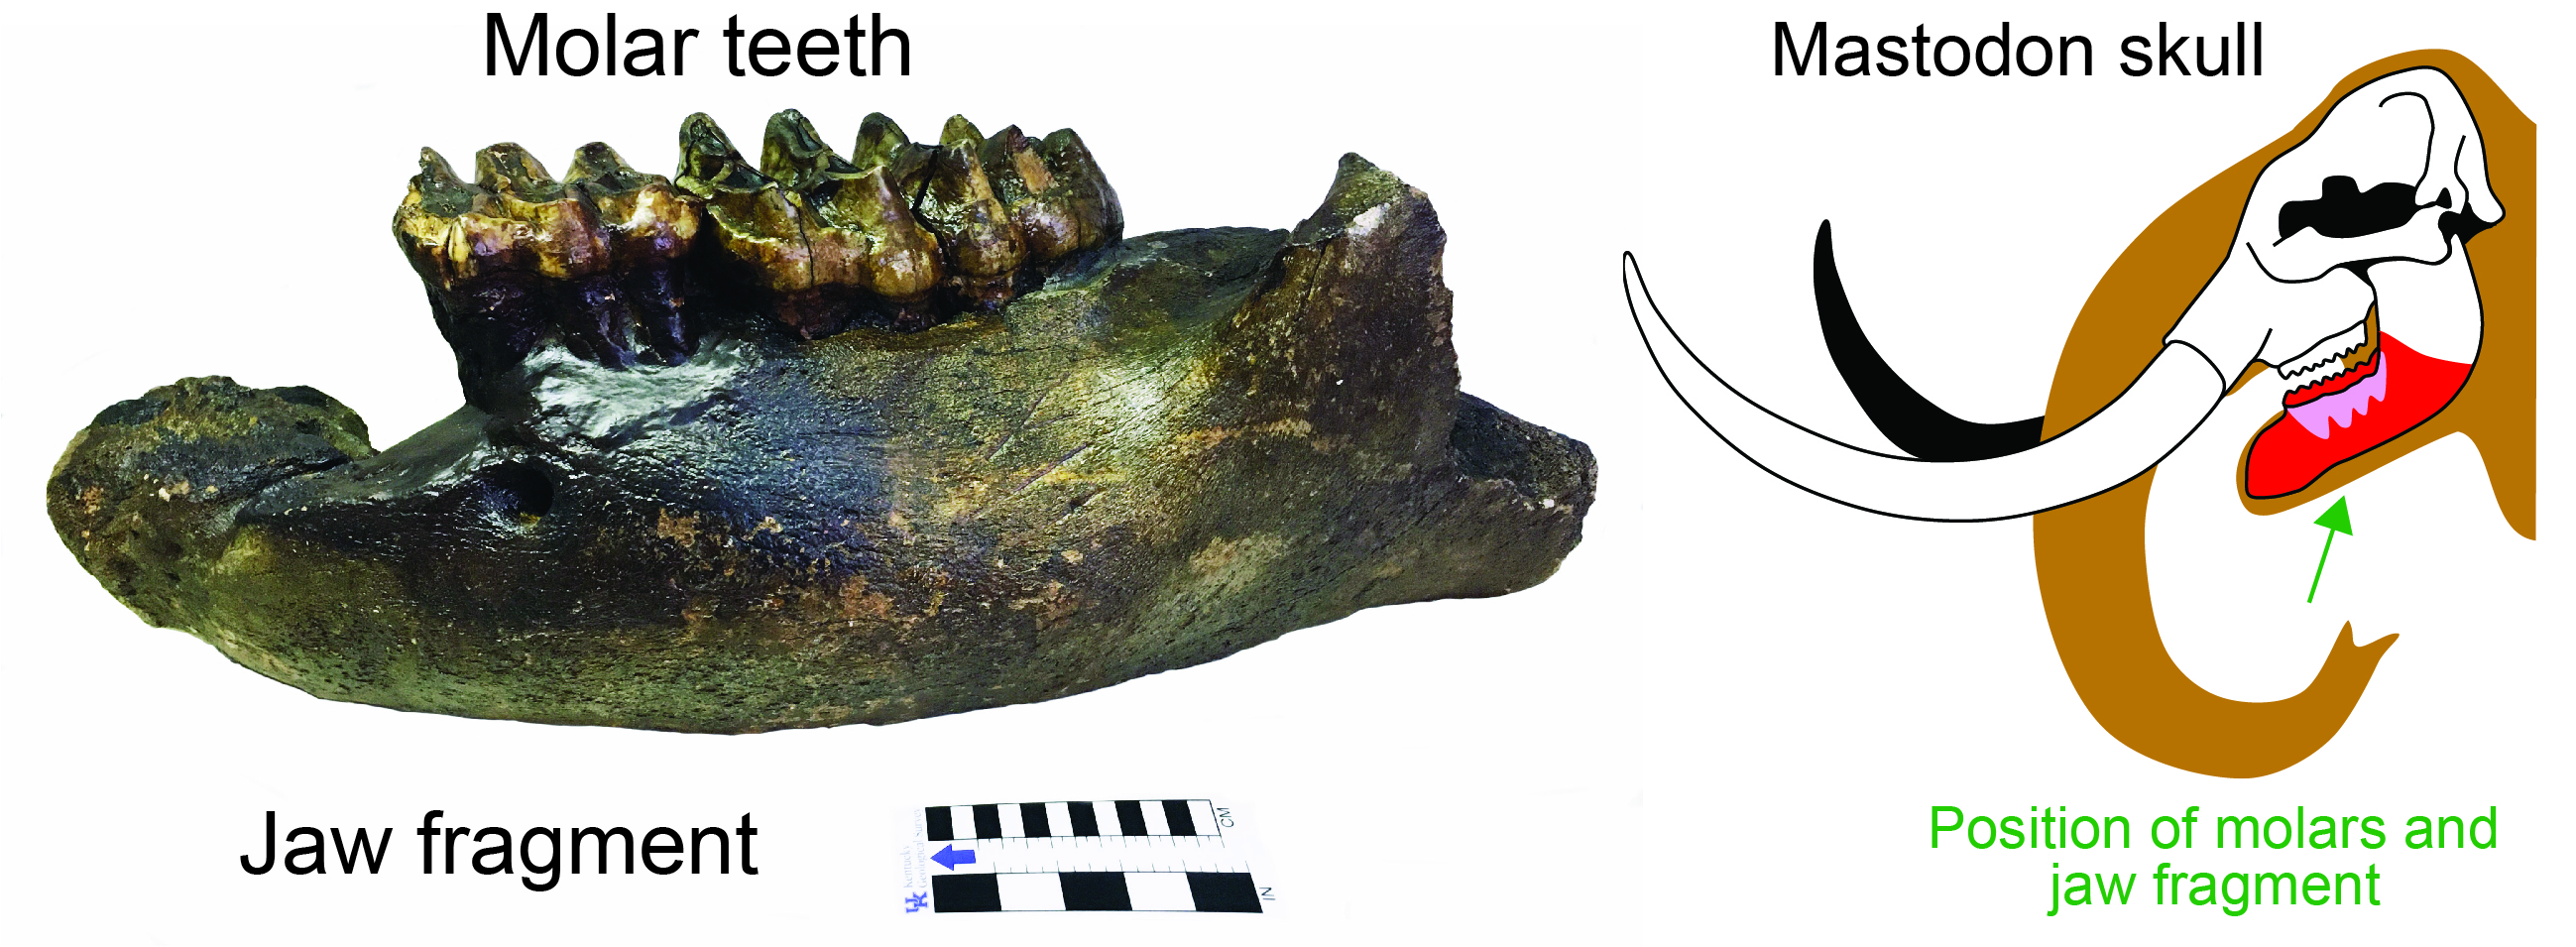 Mastodon  molars and jaw fragment and relative position of the fossil in the skull.